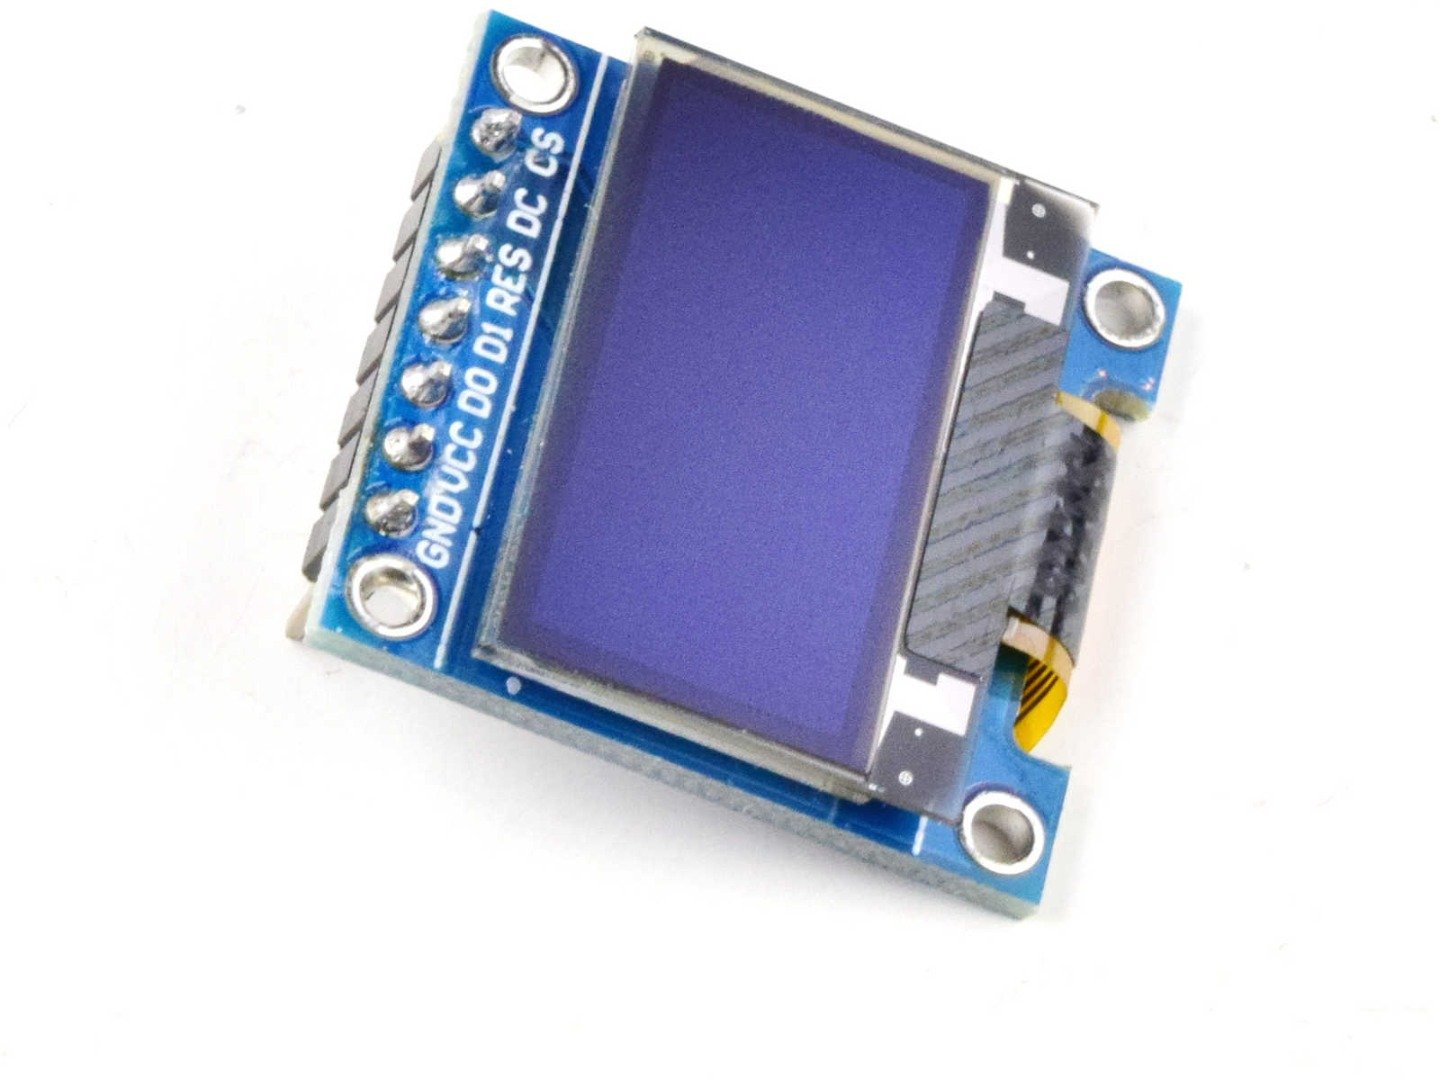 OLED Display 0.96 inch 128×64 with SPI interface – 3-5V (100% compatible with Arduino) 5